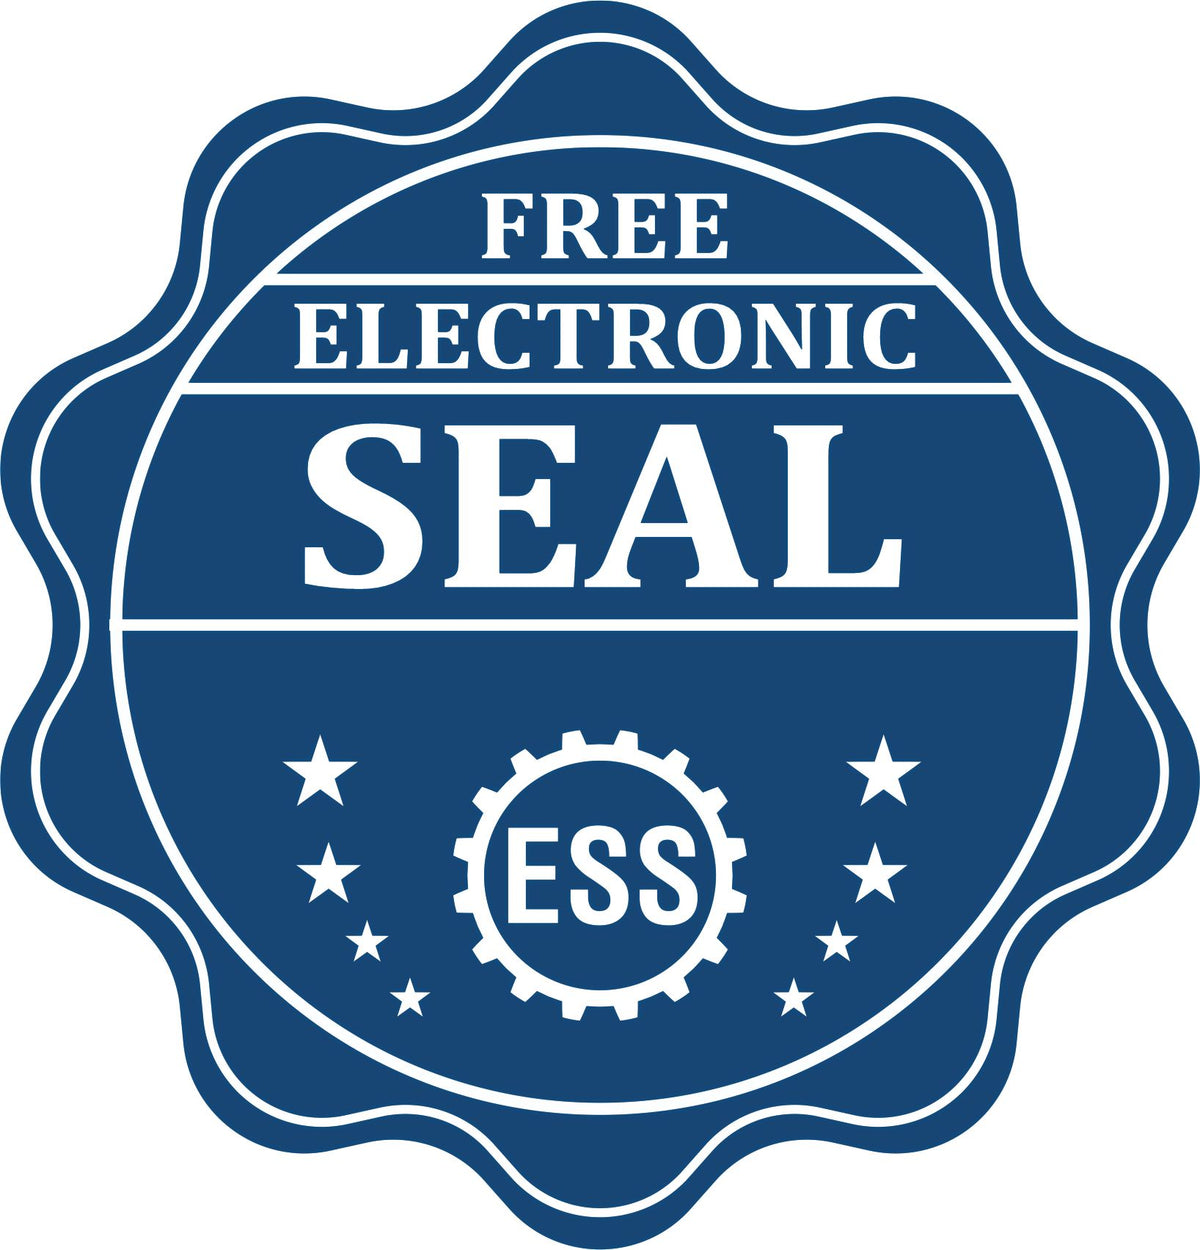 A badge showing a free electronic seal for the Long Reach Alaska Land Surveyor Seal with stars and the ESS gear on the emblem.